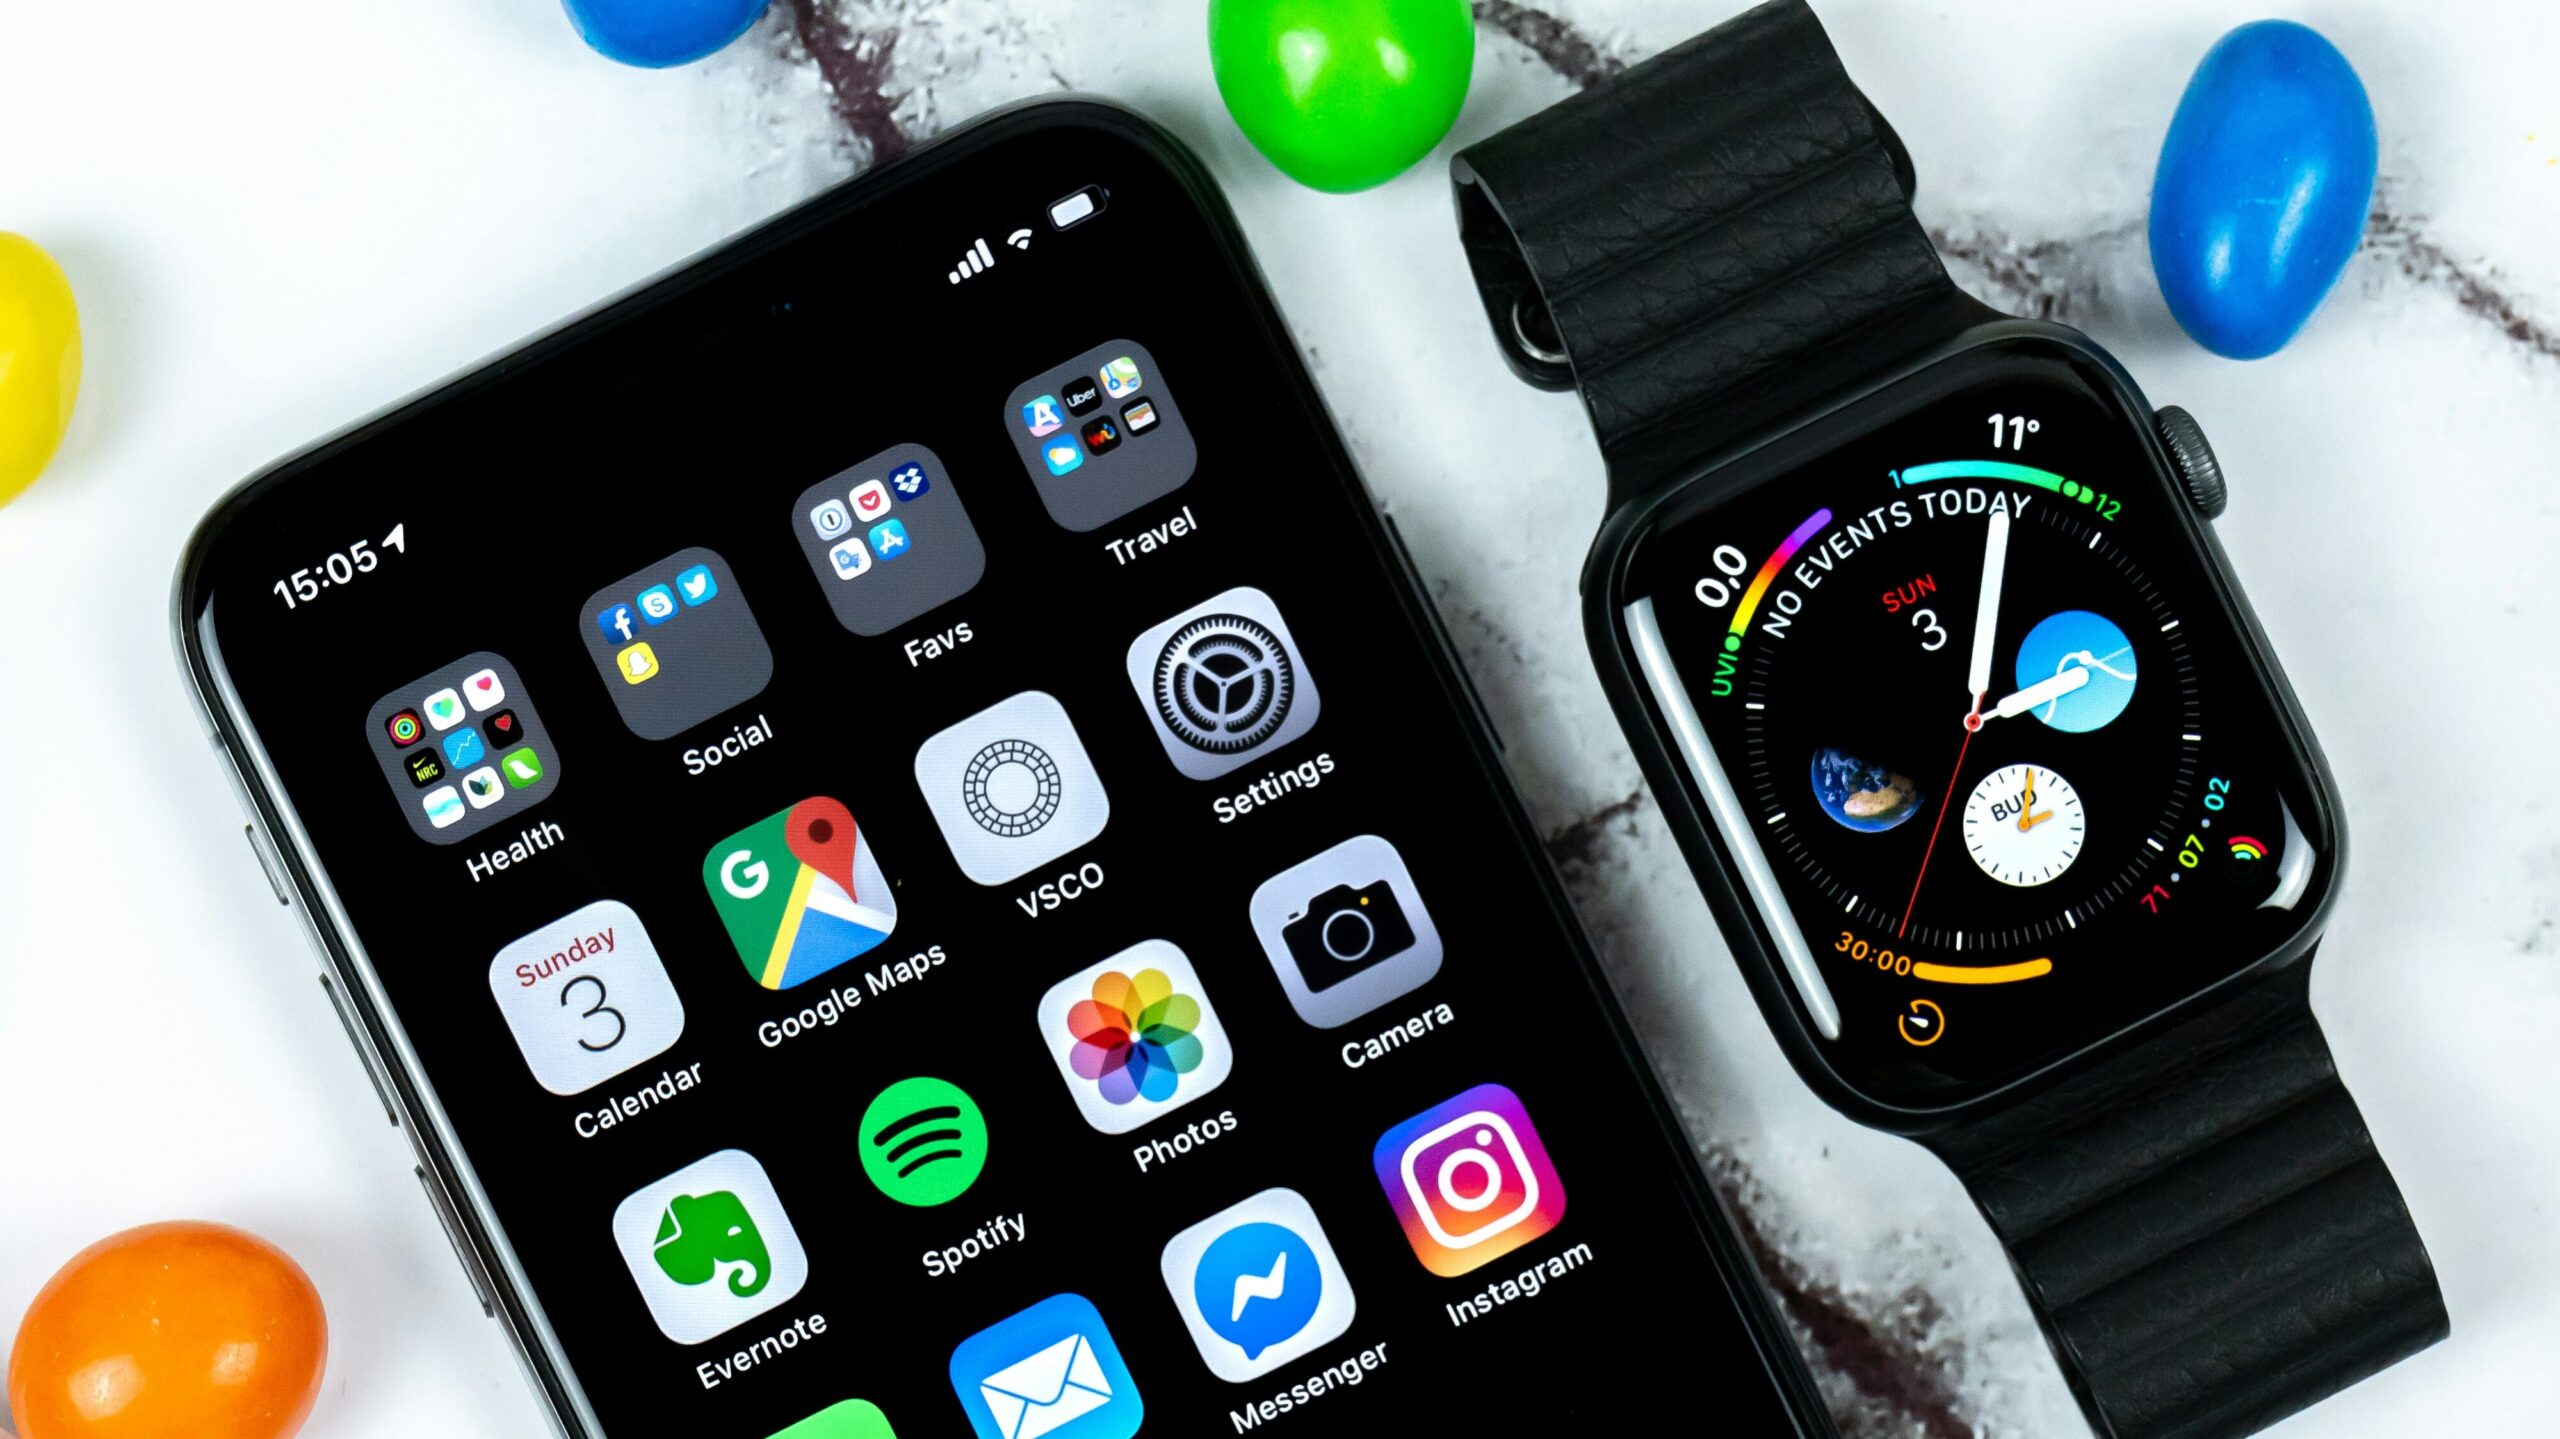 Mobile phone and a smartwatch device